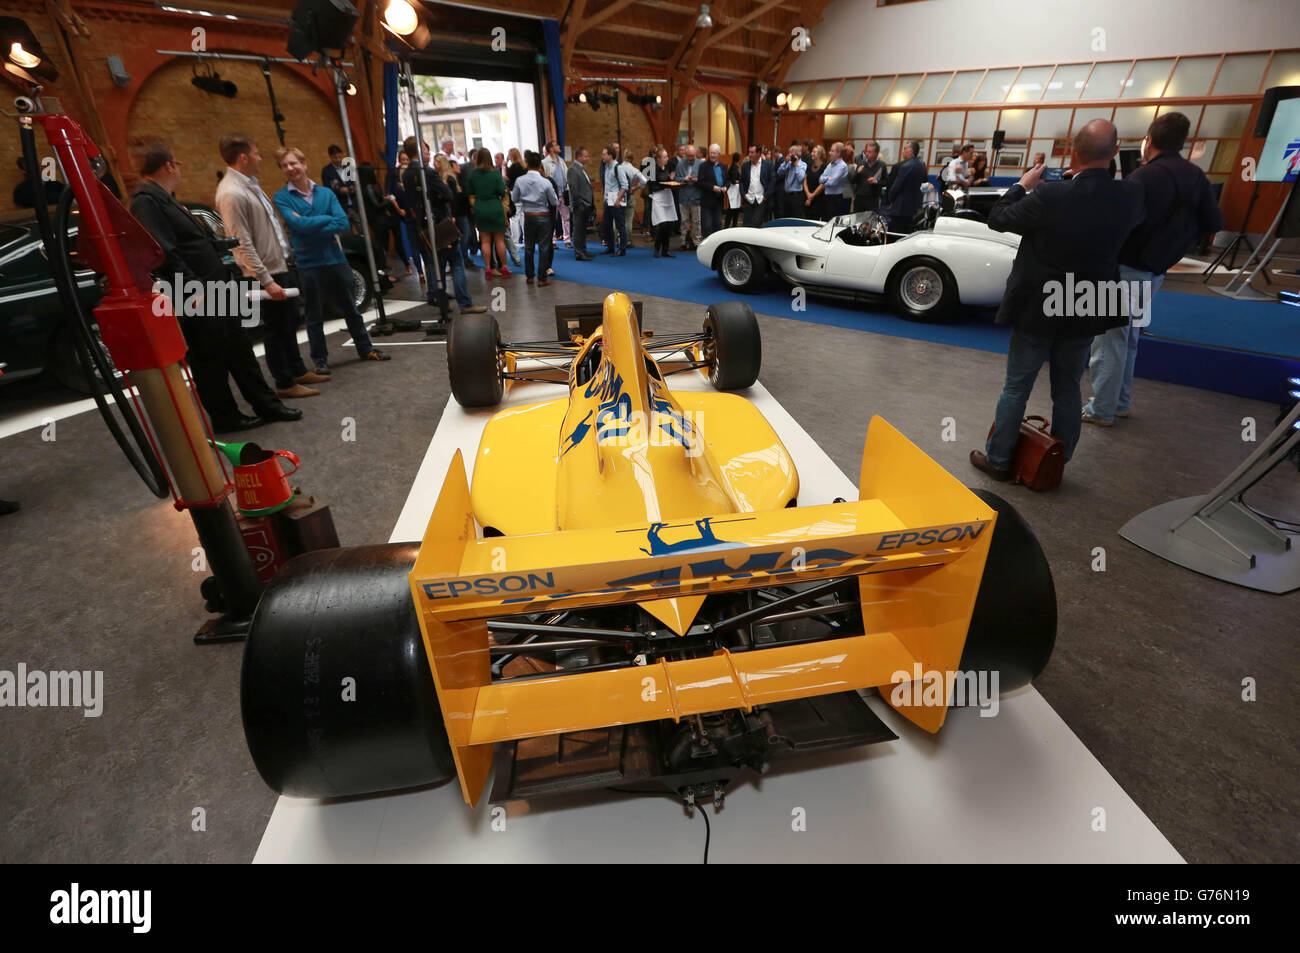 A 1989 Lotus F1 car on display during the launch of the inaugural London Classic Car Show, which will take place at ExCeL between 8th to 11th January 2015, in Kensington, London. Stock Photo